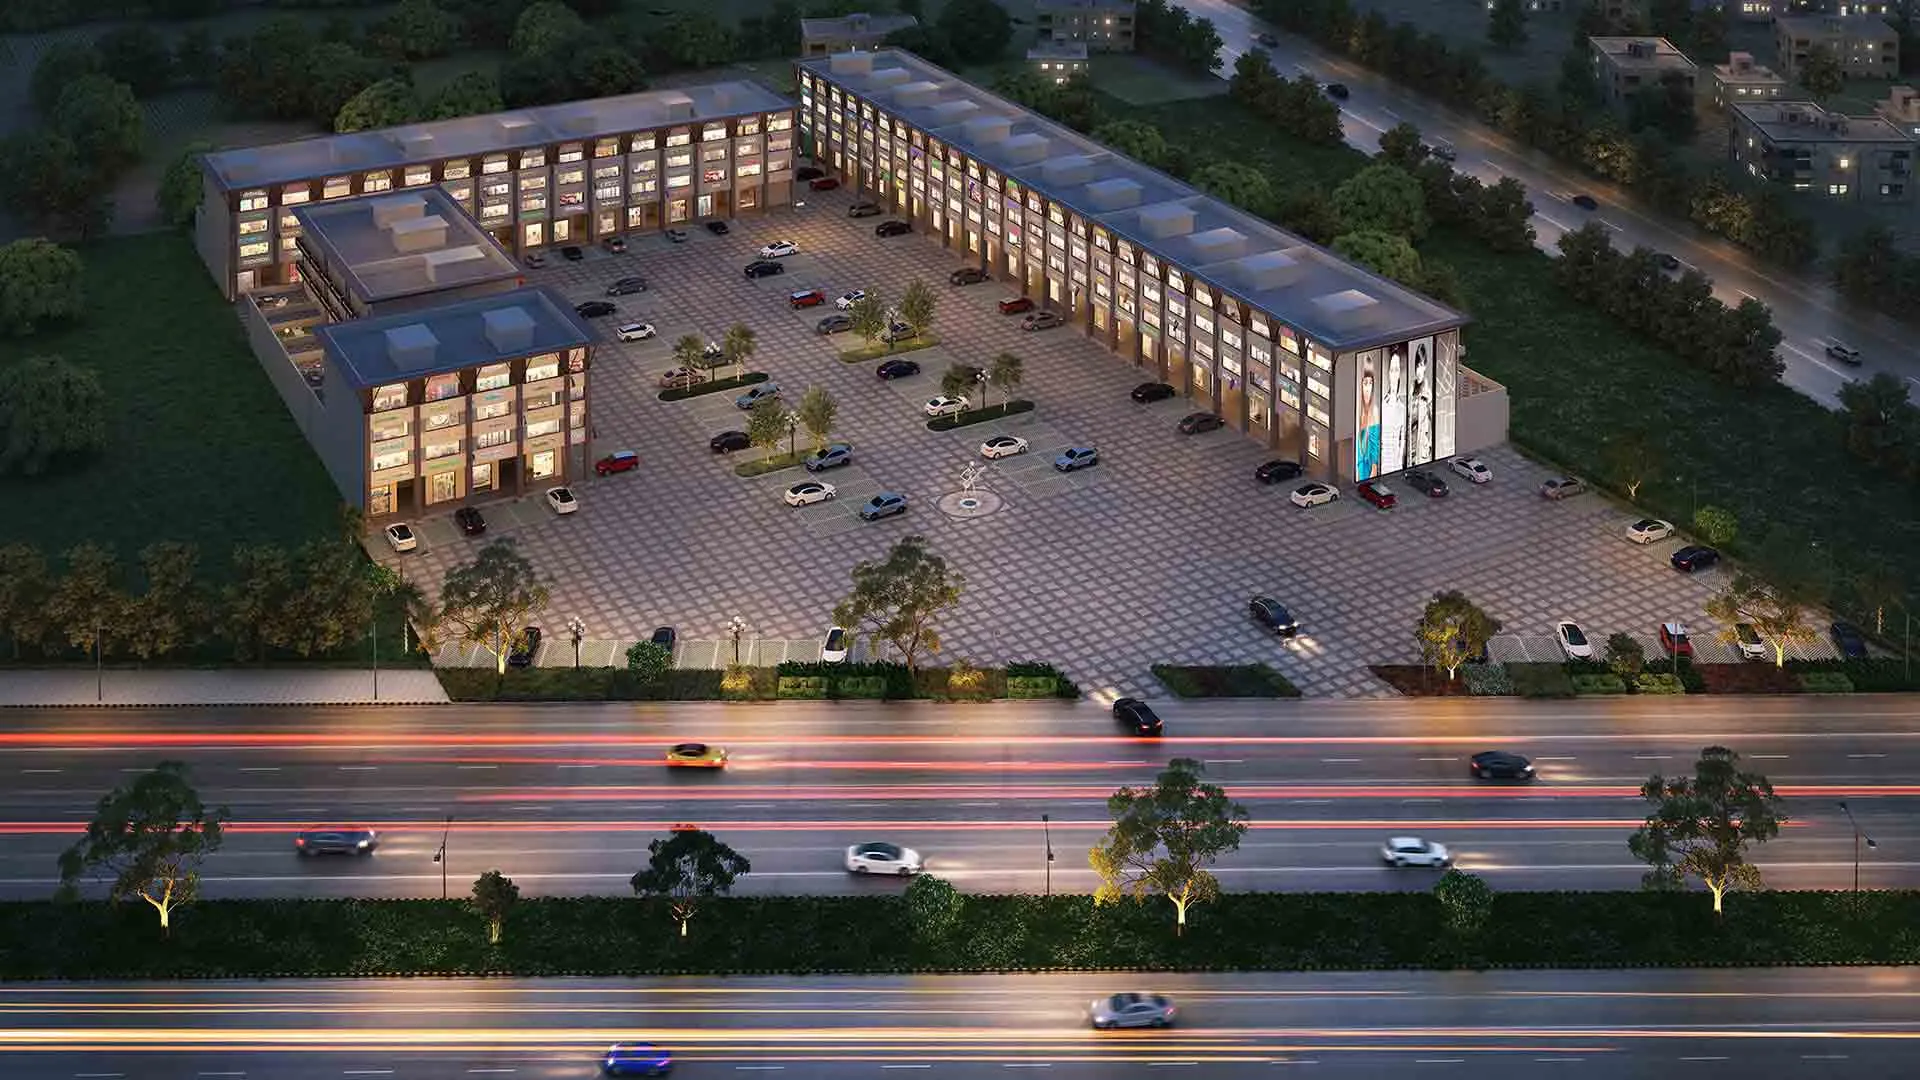 STJ Mohali Citi Square Aerocity Commercial Property - New Project Image 1